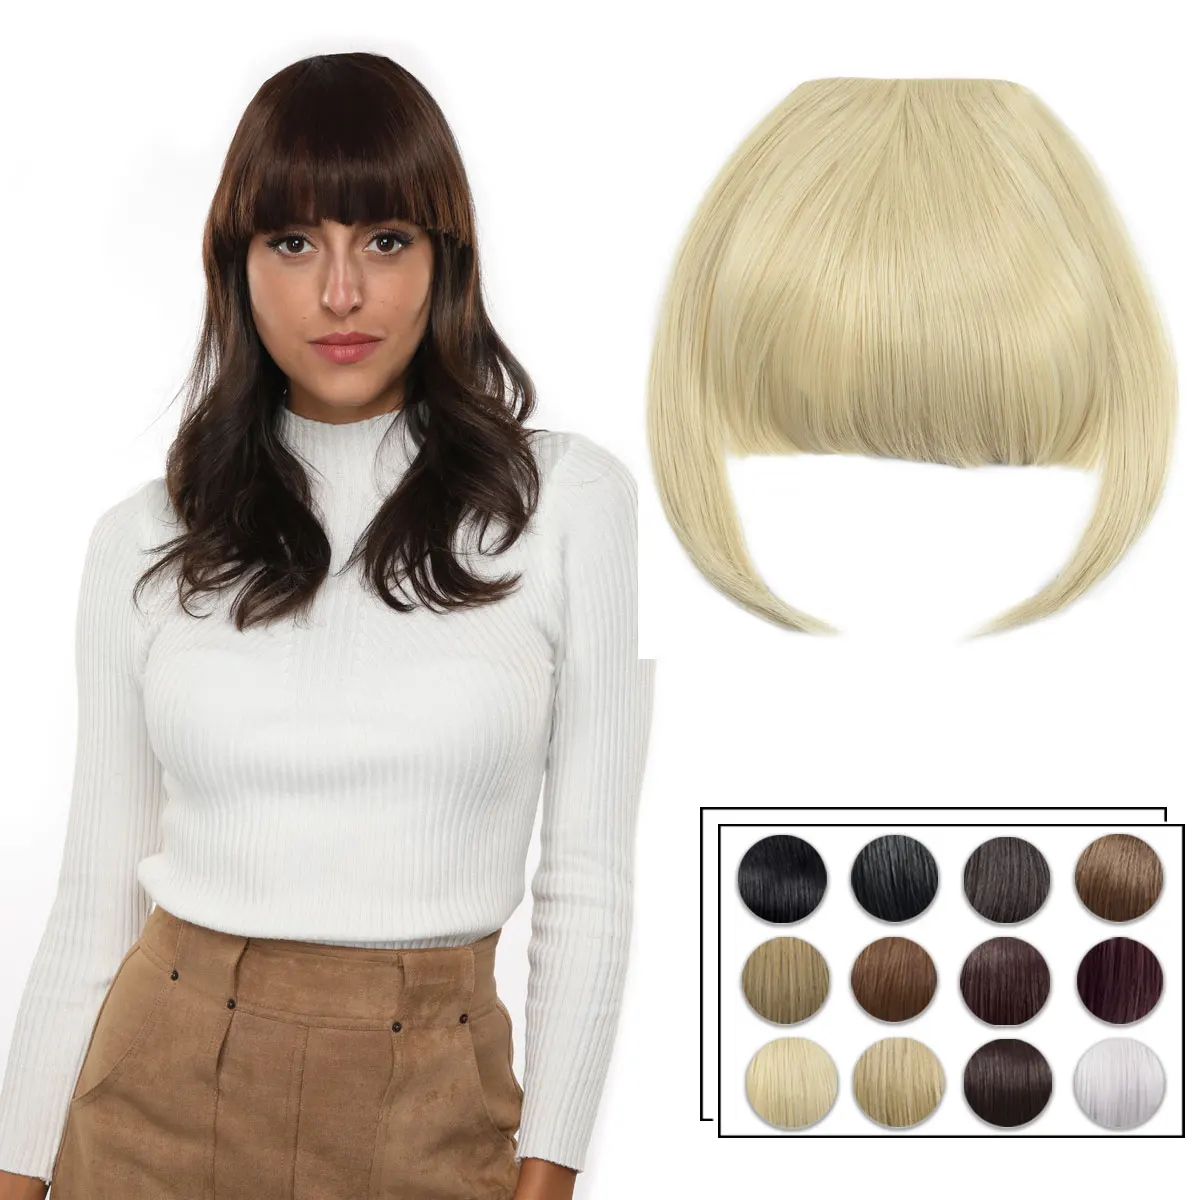 

Free Sample straight bob wig fringe,fringe hair extension,synthetic hair wigs, 613c-bleach blonde